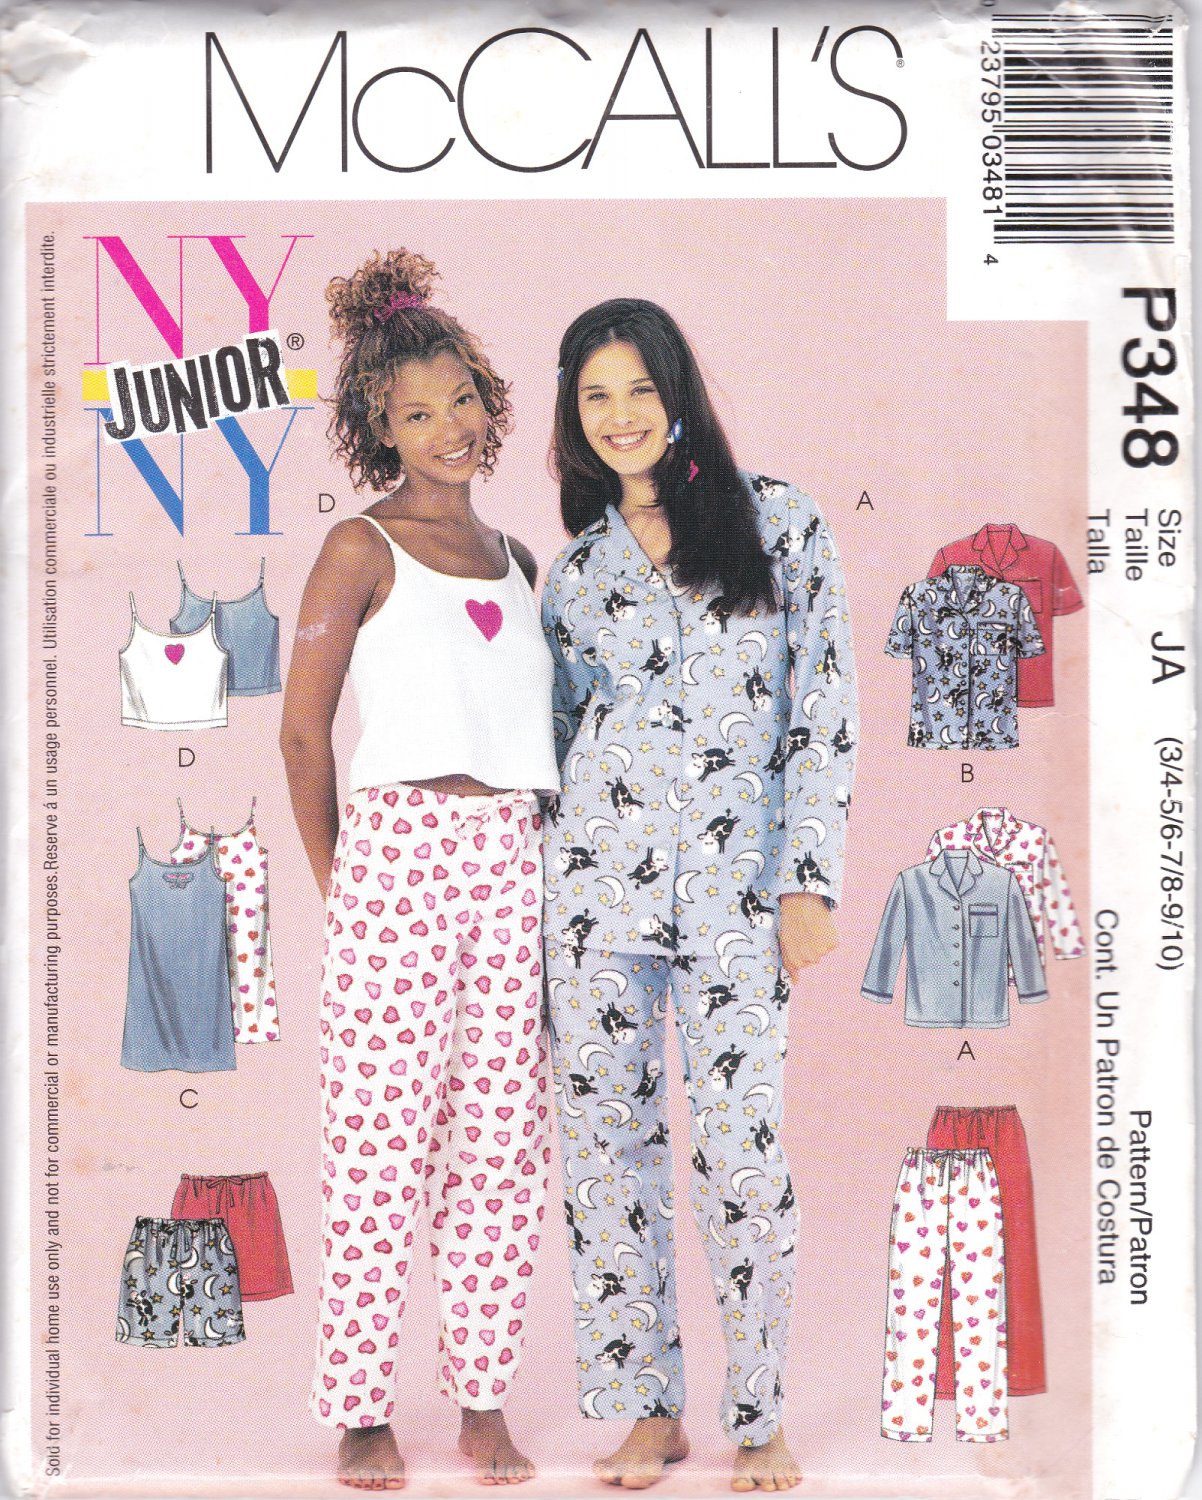 McCall's P348 Junior Girls Sewing Pattern Teens Nightgown Pants Camisole Sizes 3/4-5/6-7/8-9/10